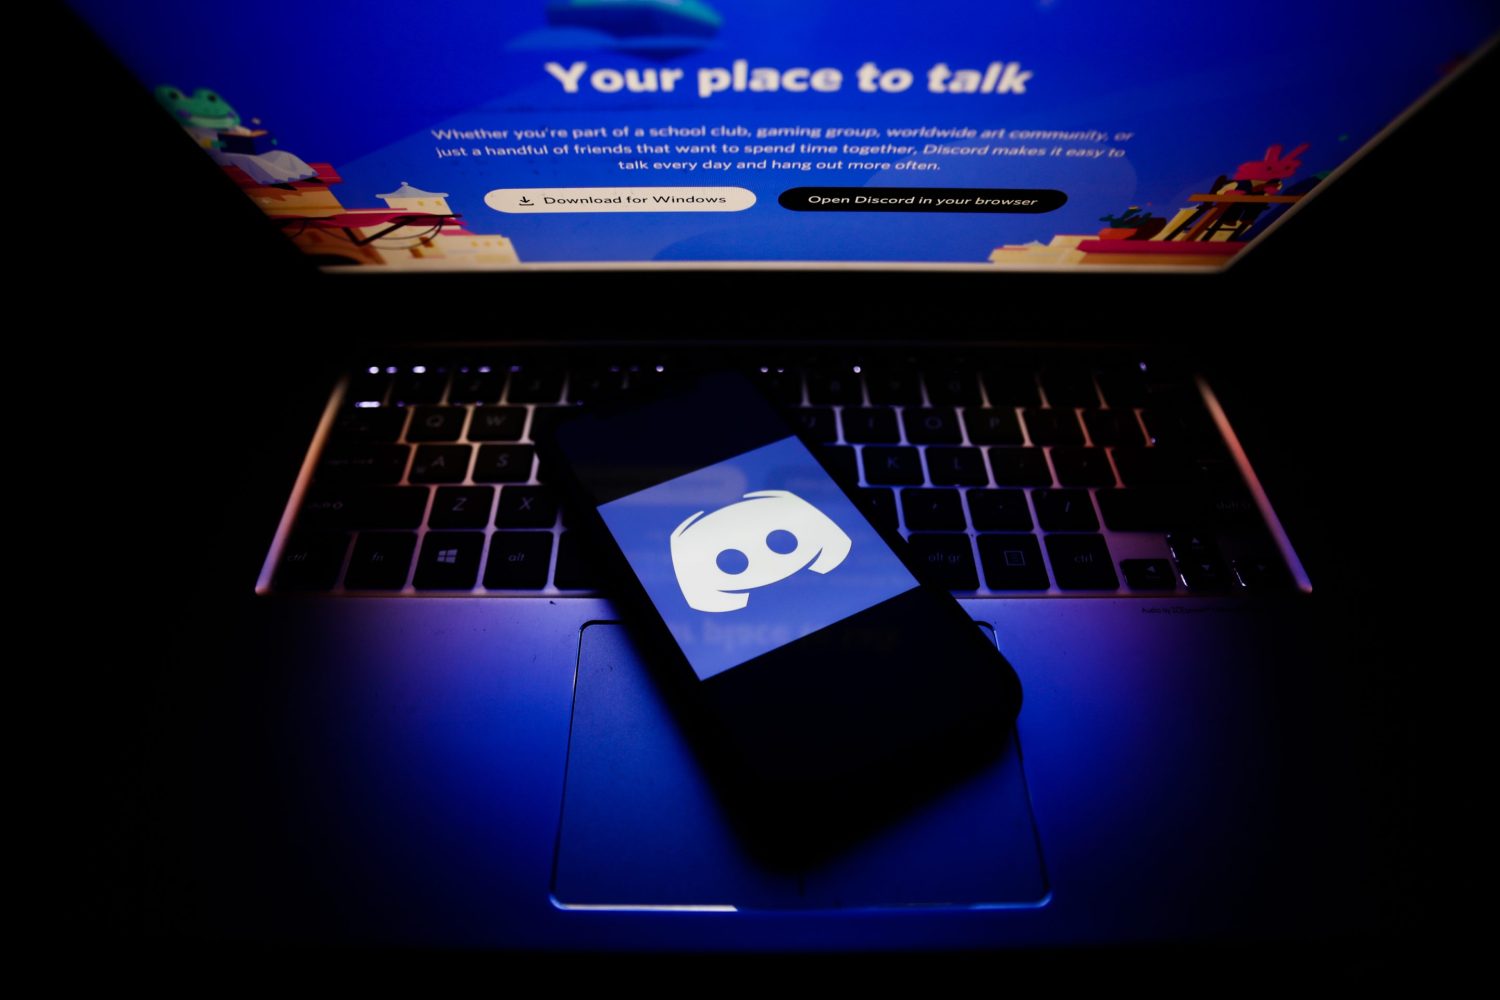 Discord app opened on smartphone and laptop